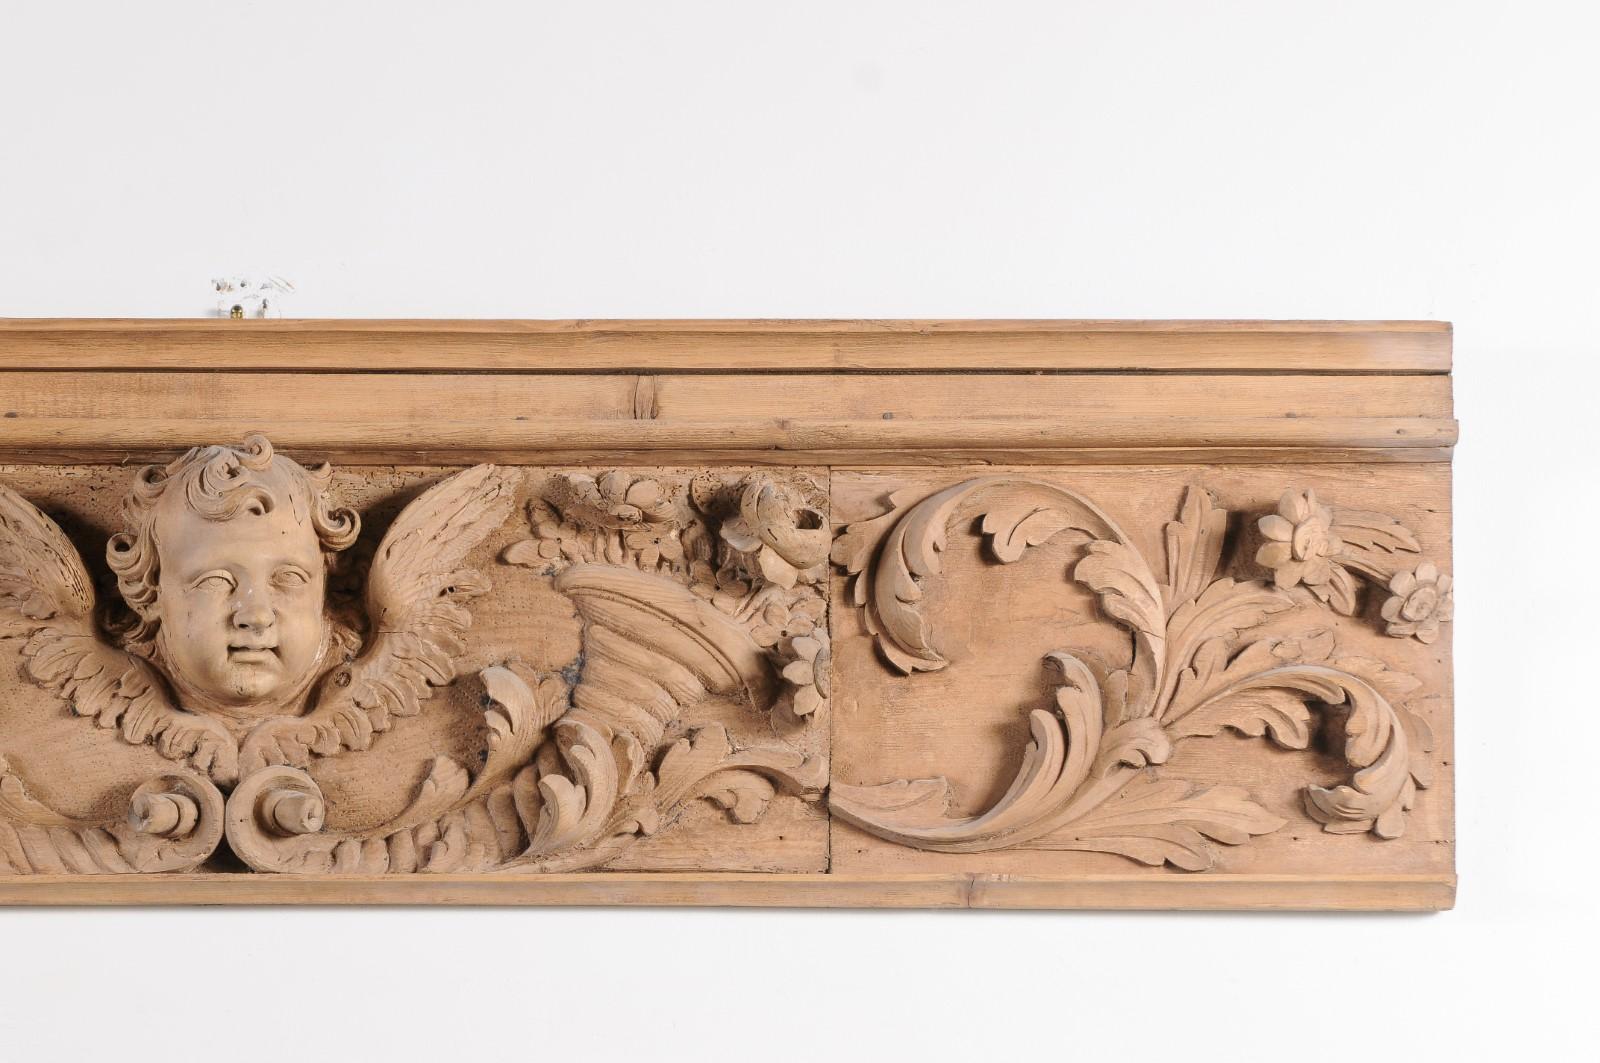 A French Napoléon III period lemon wood carved panel from the mid 19th century, with angel, cornucopia and scrolling leaves. Created in France during emperor Napoléon III's reign, this horizontal lemon wood panel depicts an angel face with wings